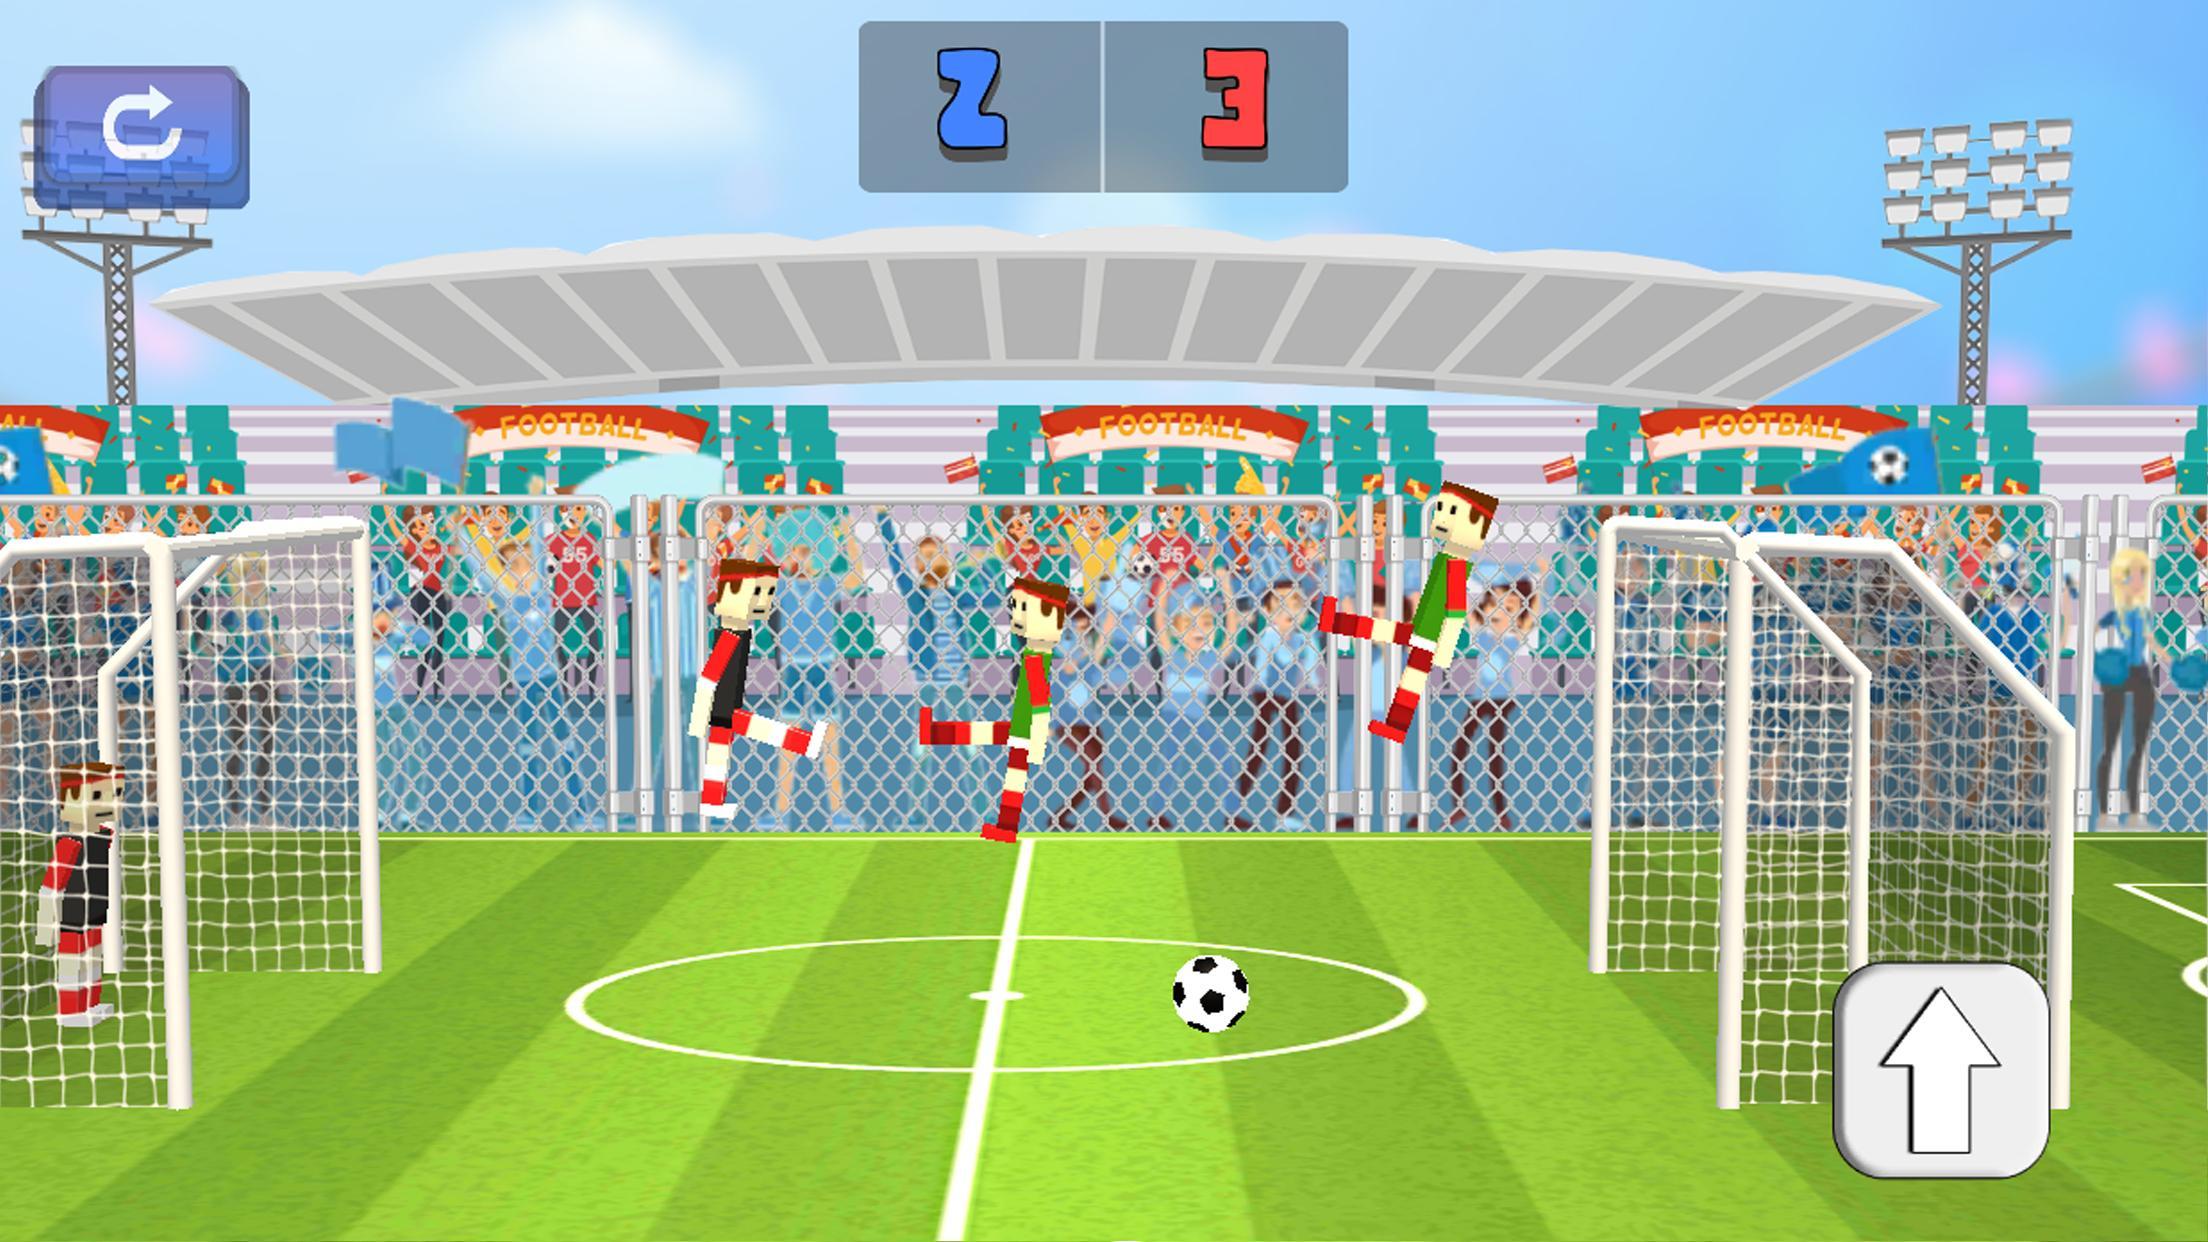 Fun Soccer Physics Game For Android Apk Download - roblox soccer gfx